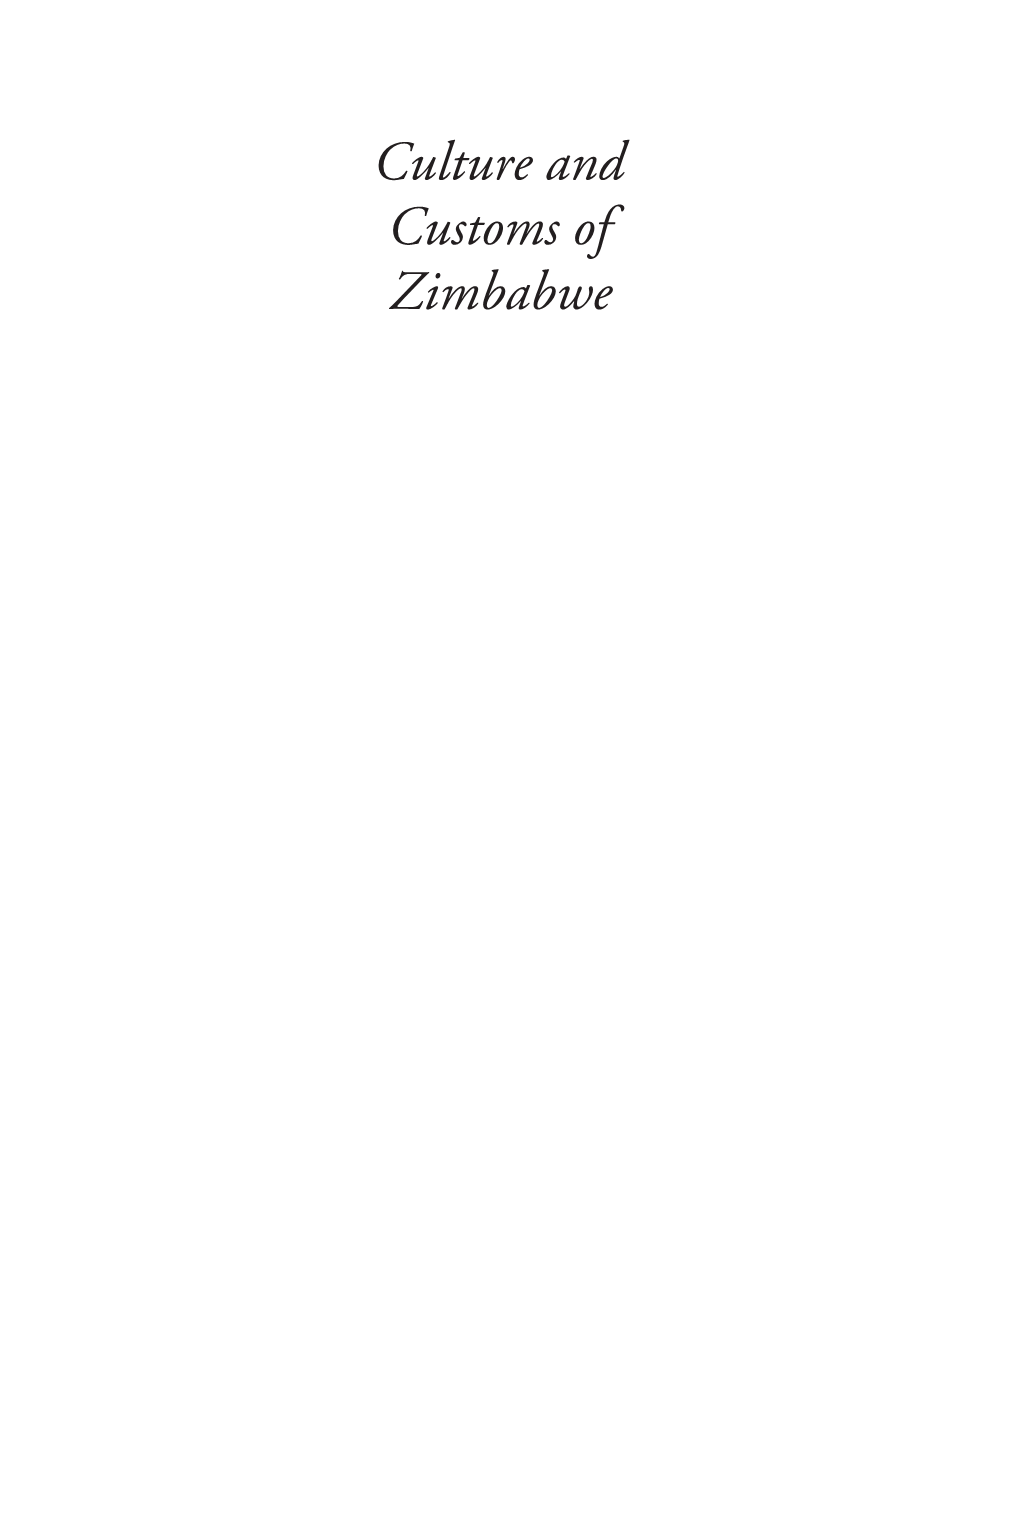 Culture and Customs of Zimbabwe 6596D FM UG 9/20/02 5:33 PM Page Ii